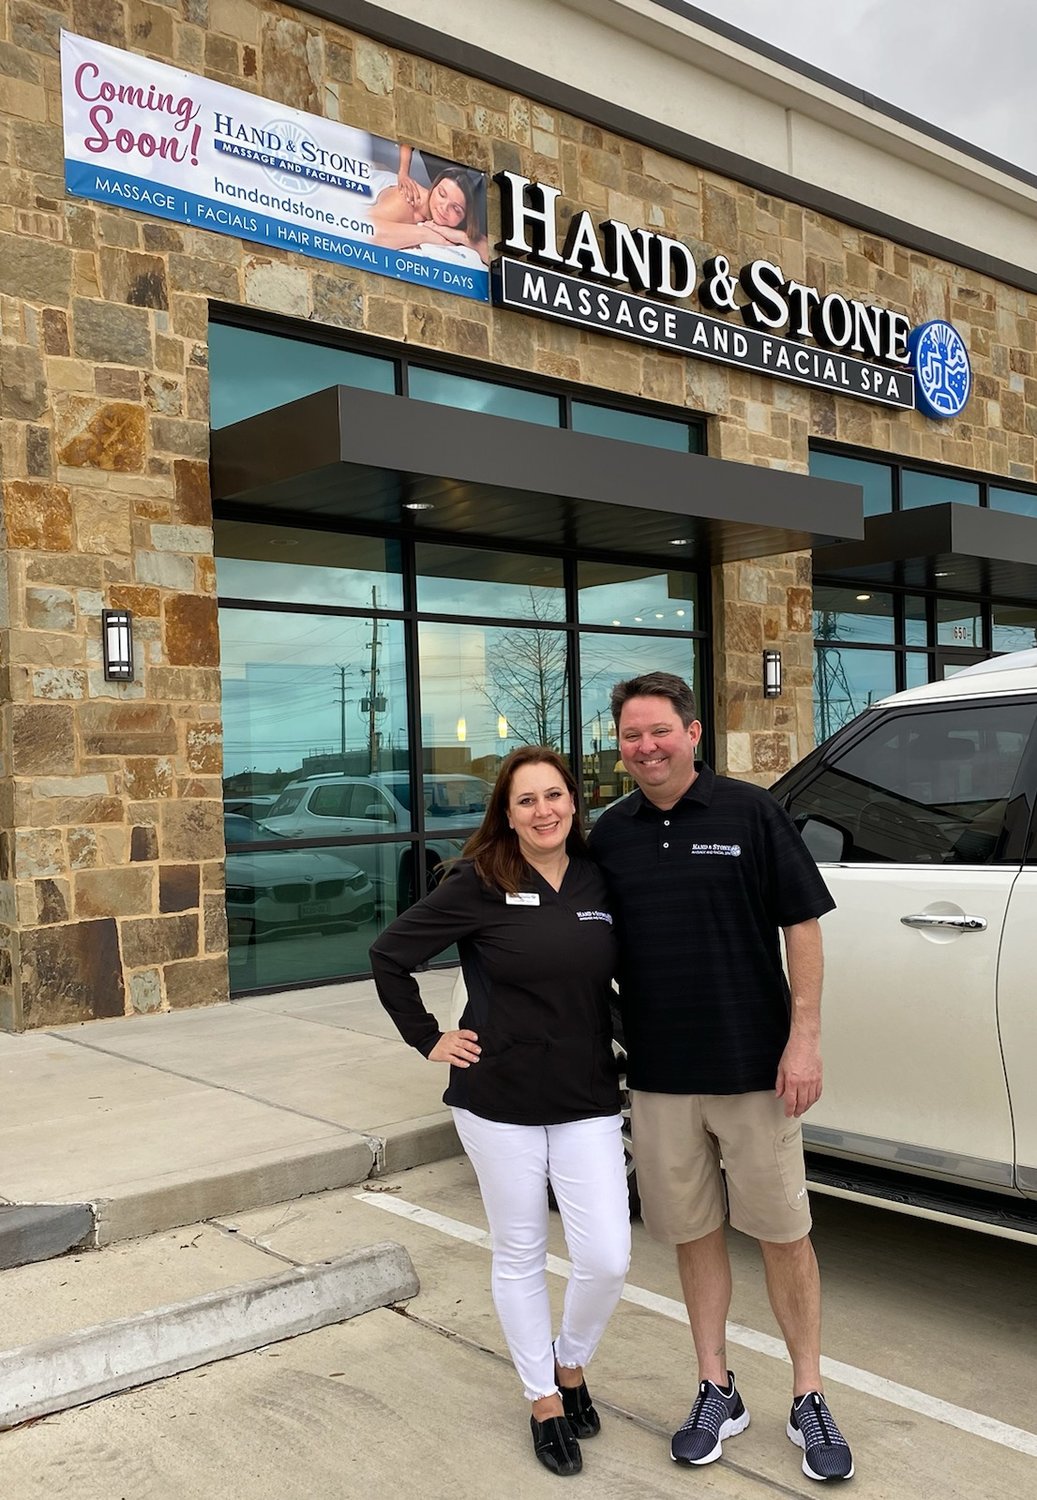 Hand & Stone Massage and Facial Spa opens on FM 1463 ...